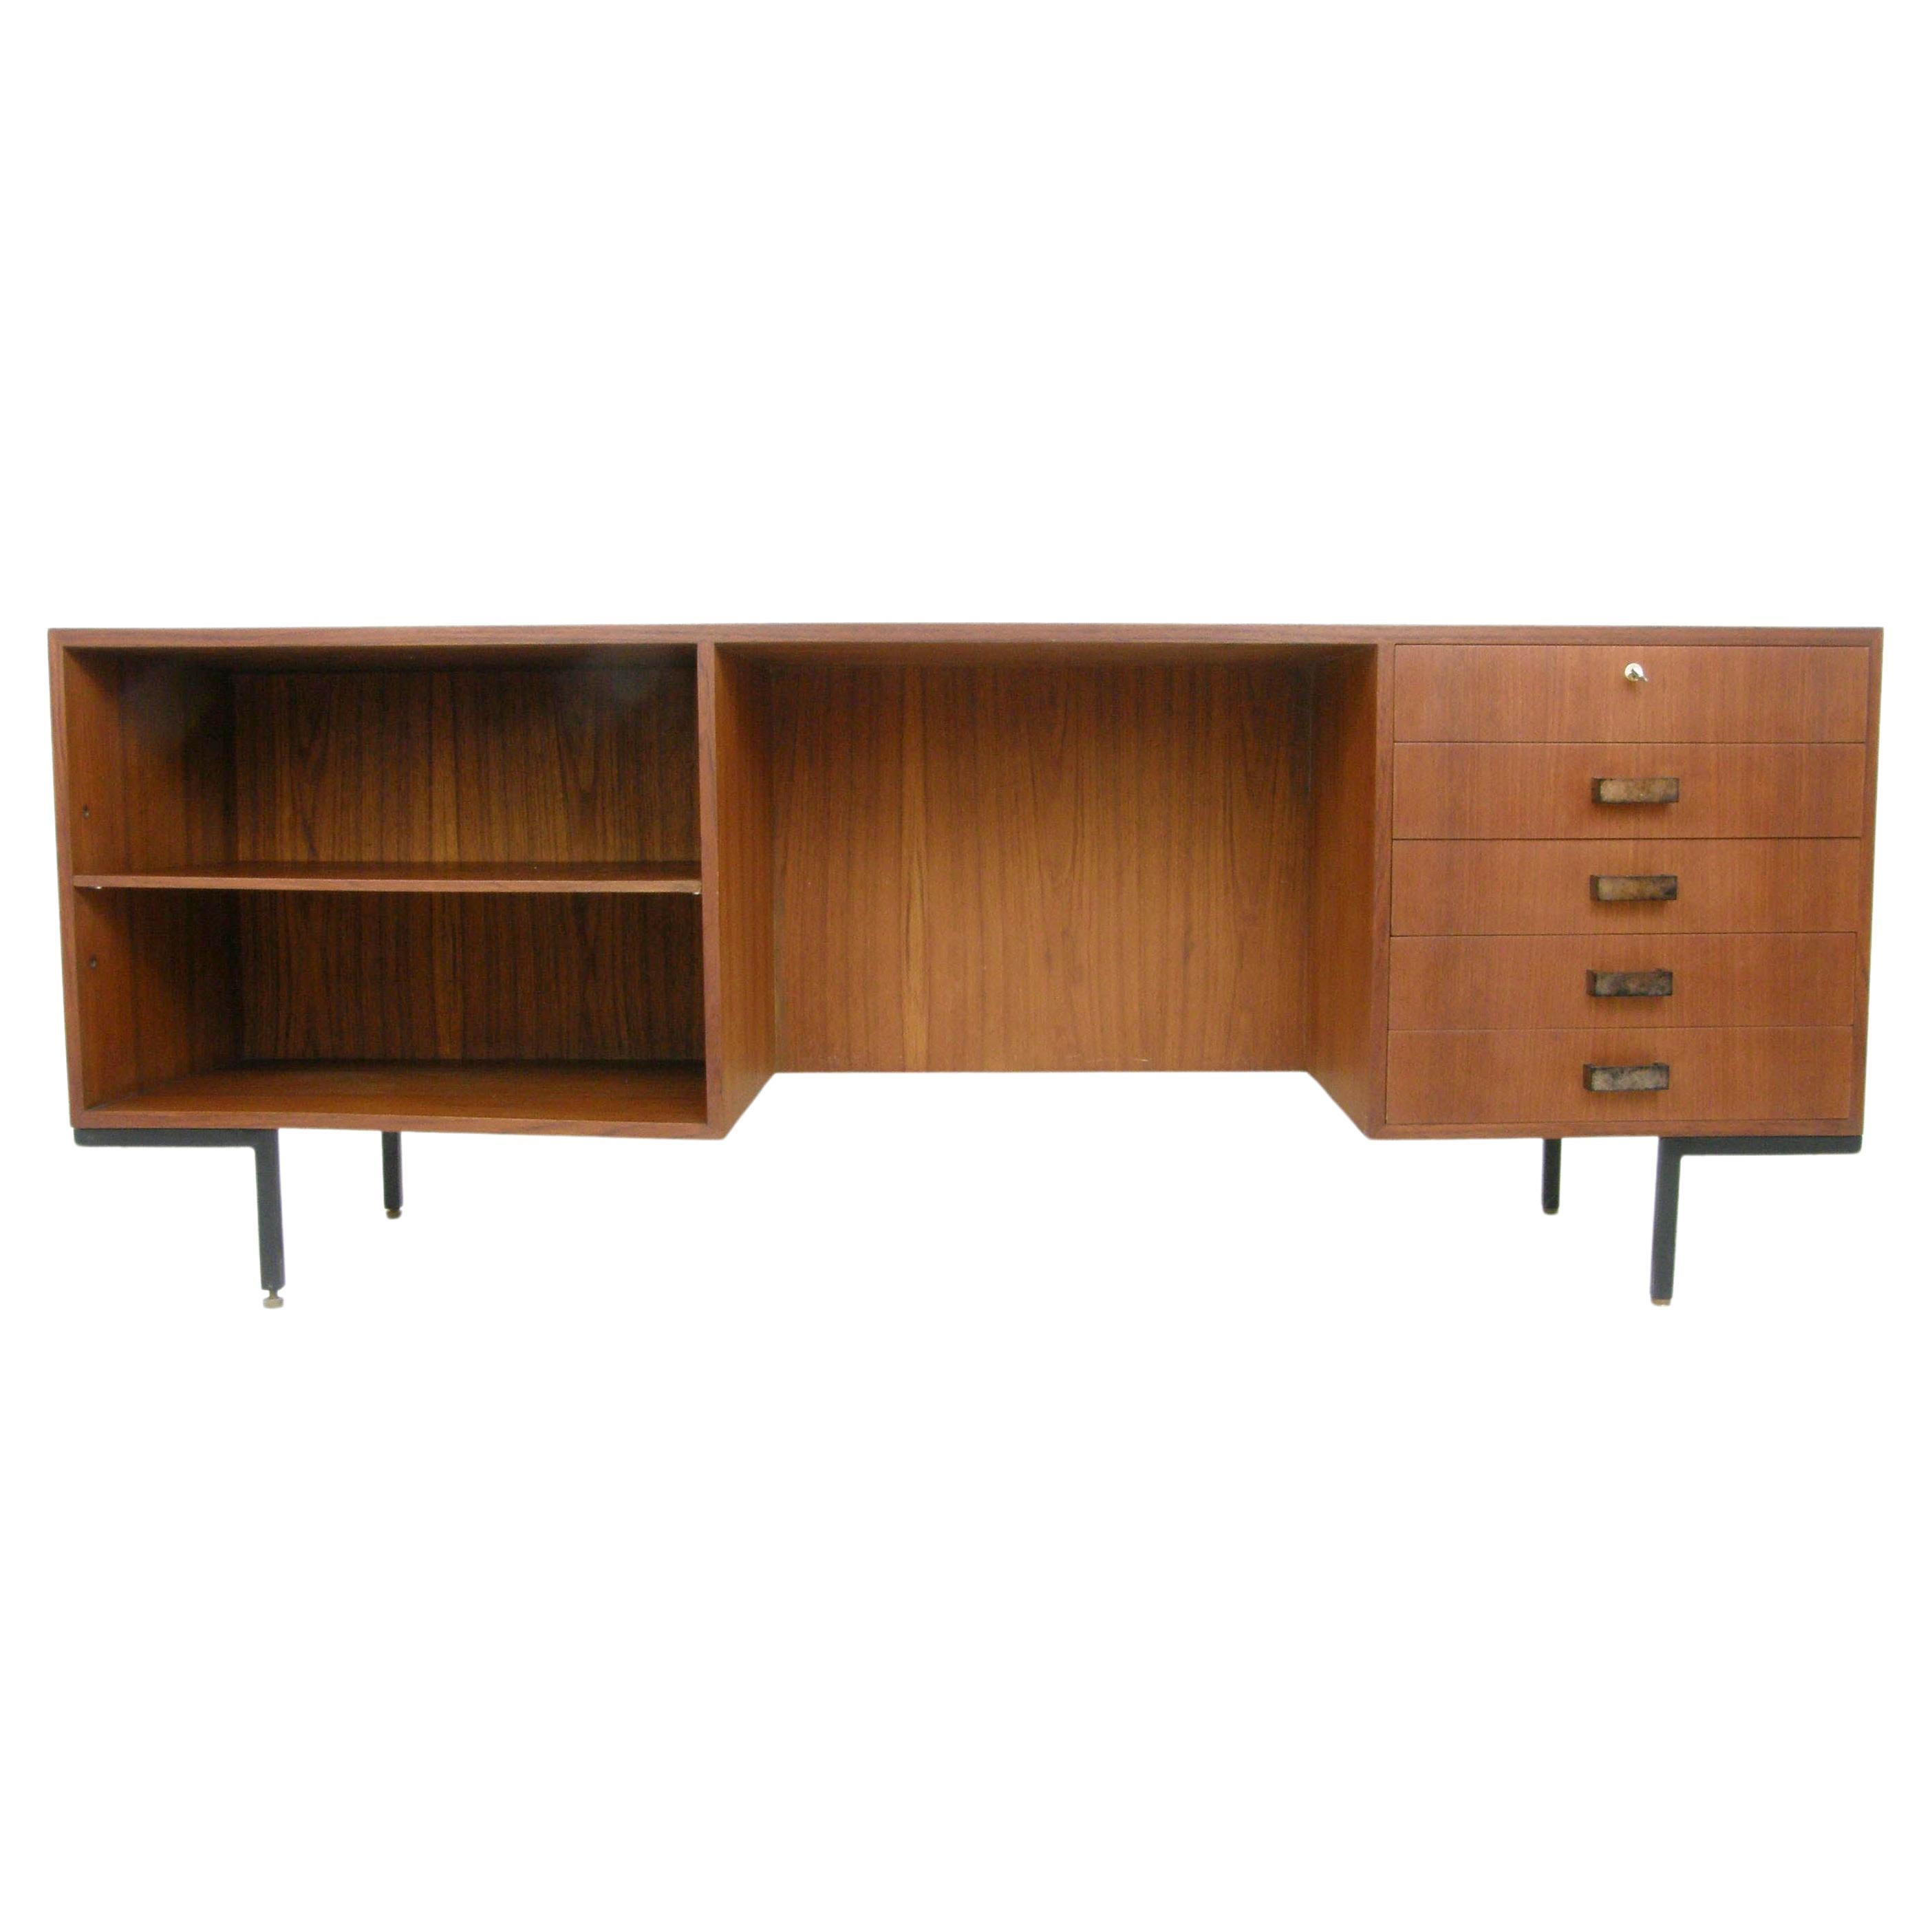 Vintage sideboard Paolo Tilche for Arform, italy 1960s